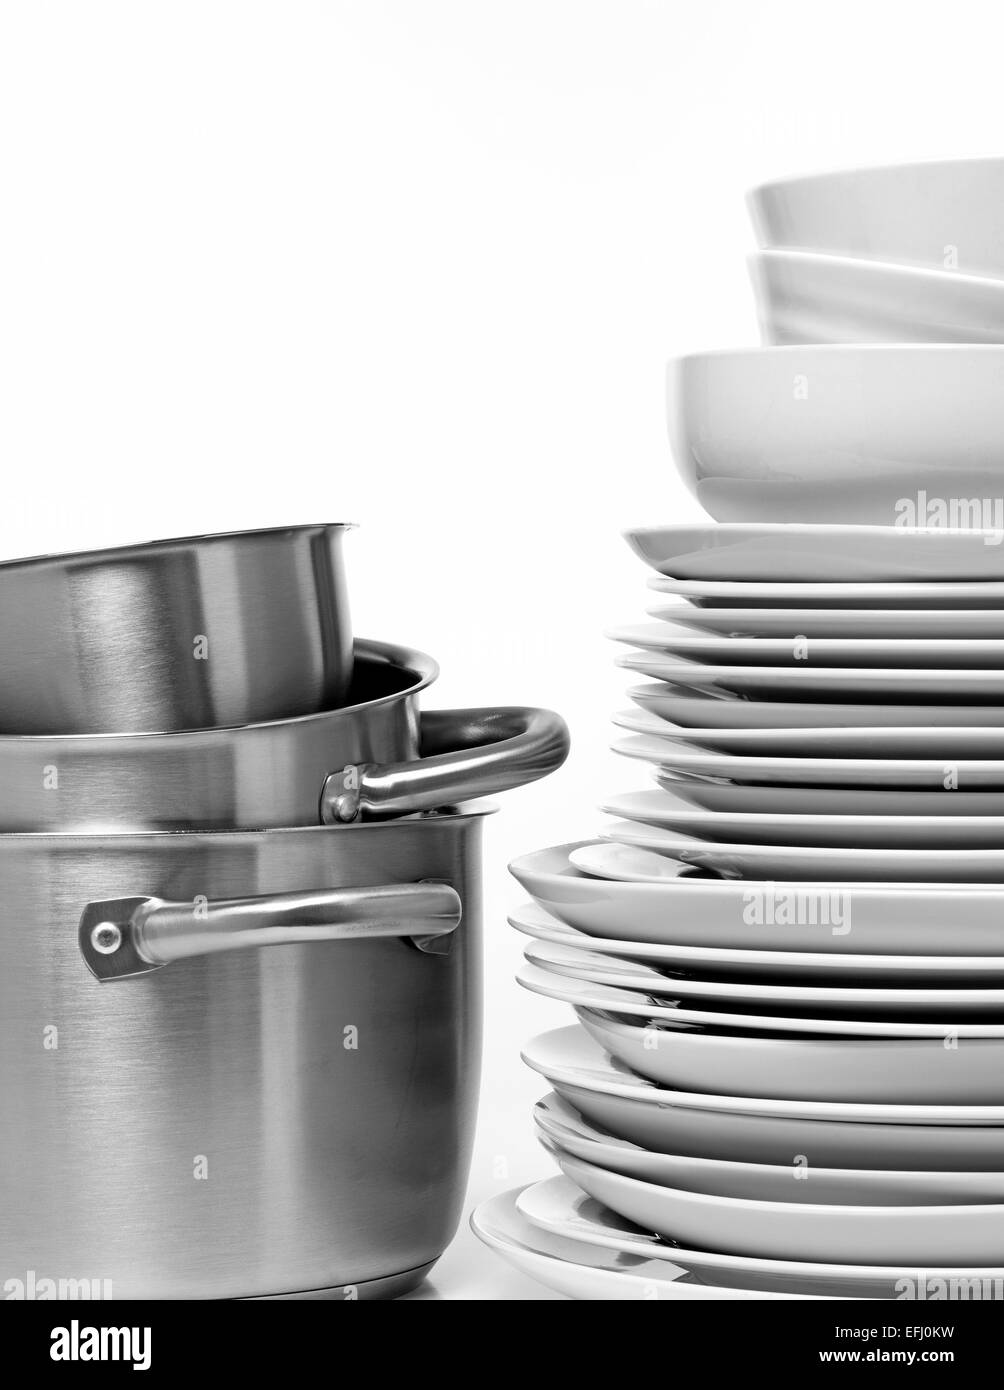 Plates in a stack Stock Photo